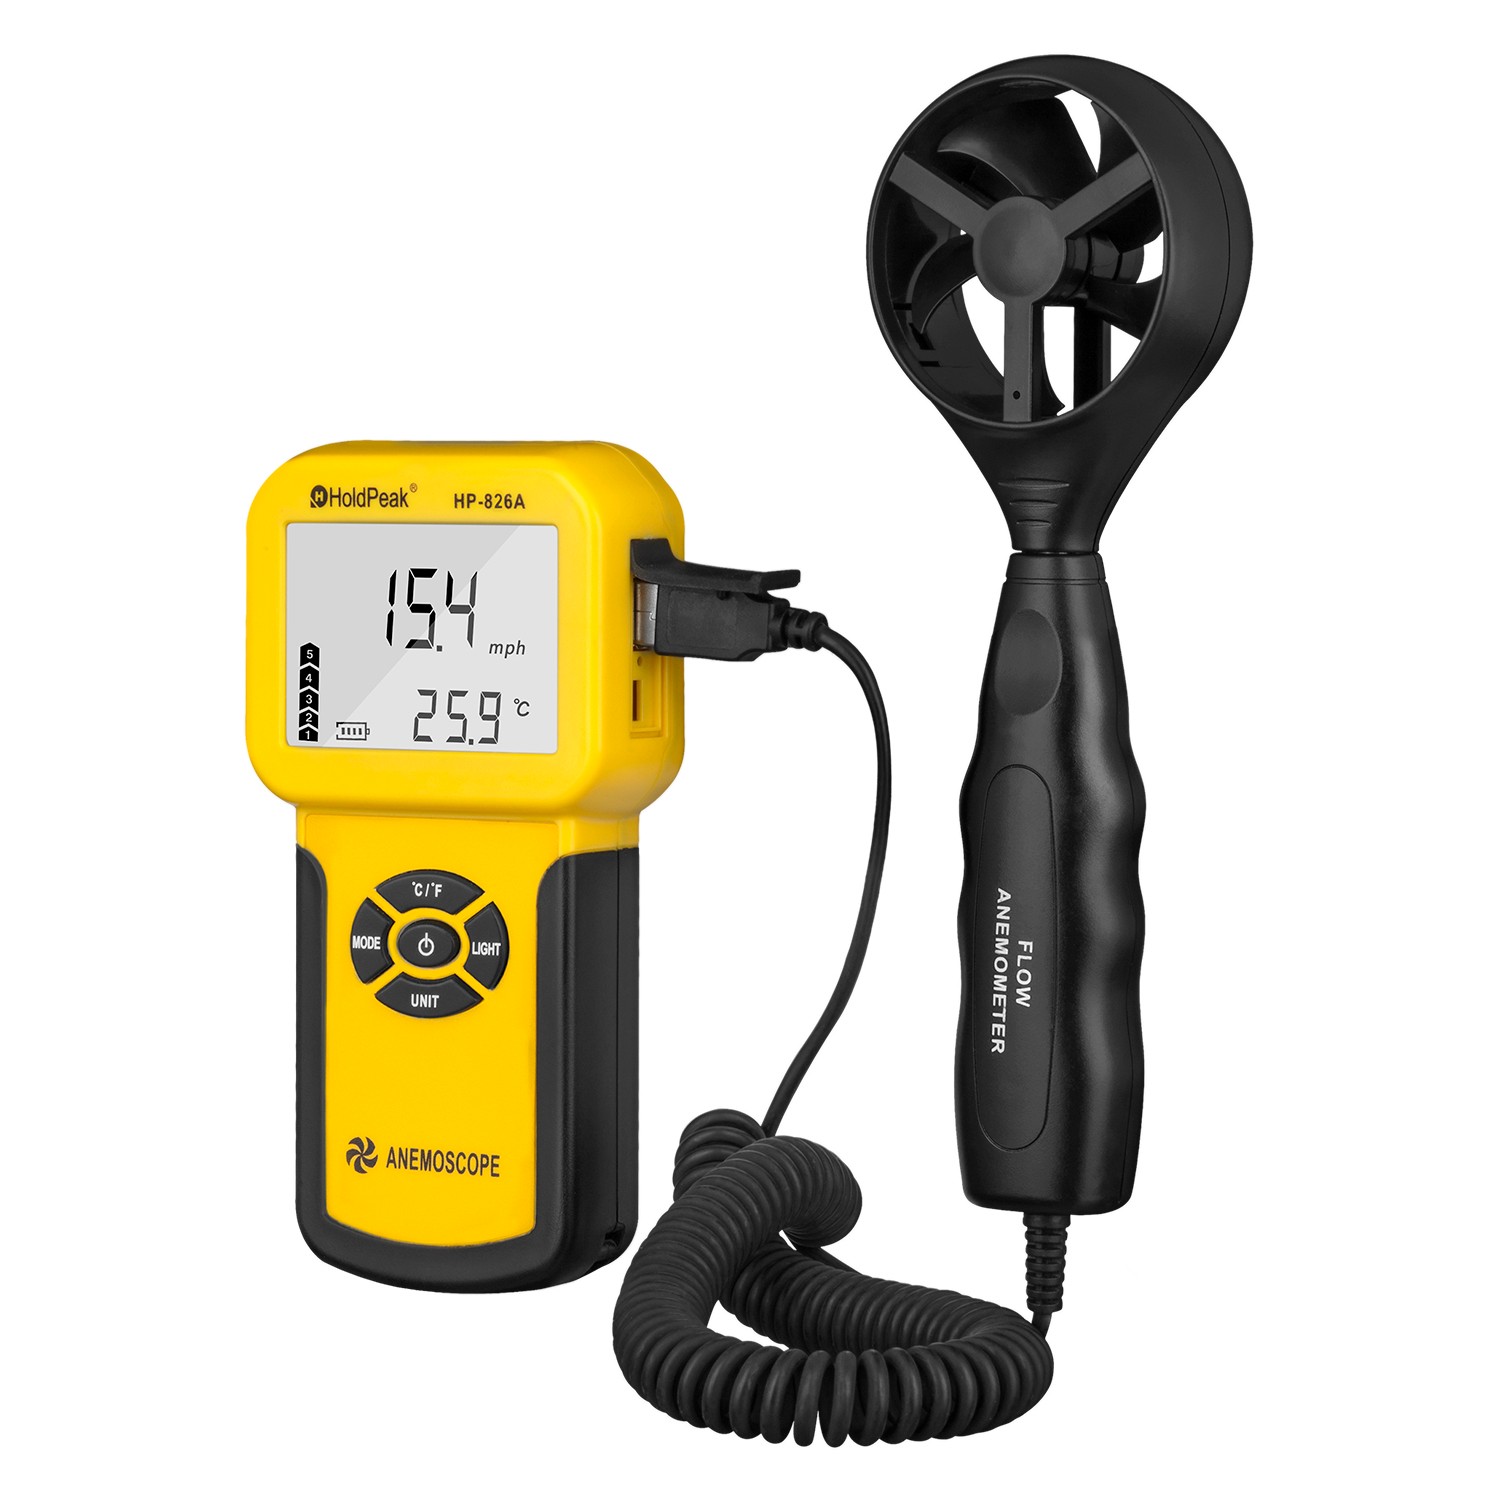 HoldPeak durable wind speed meter company for tower crane